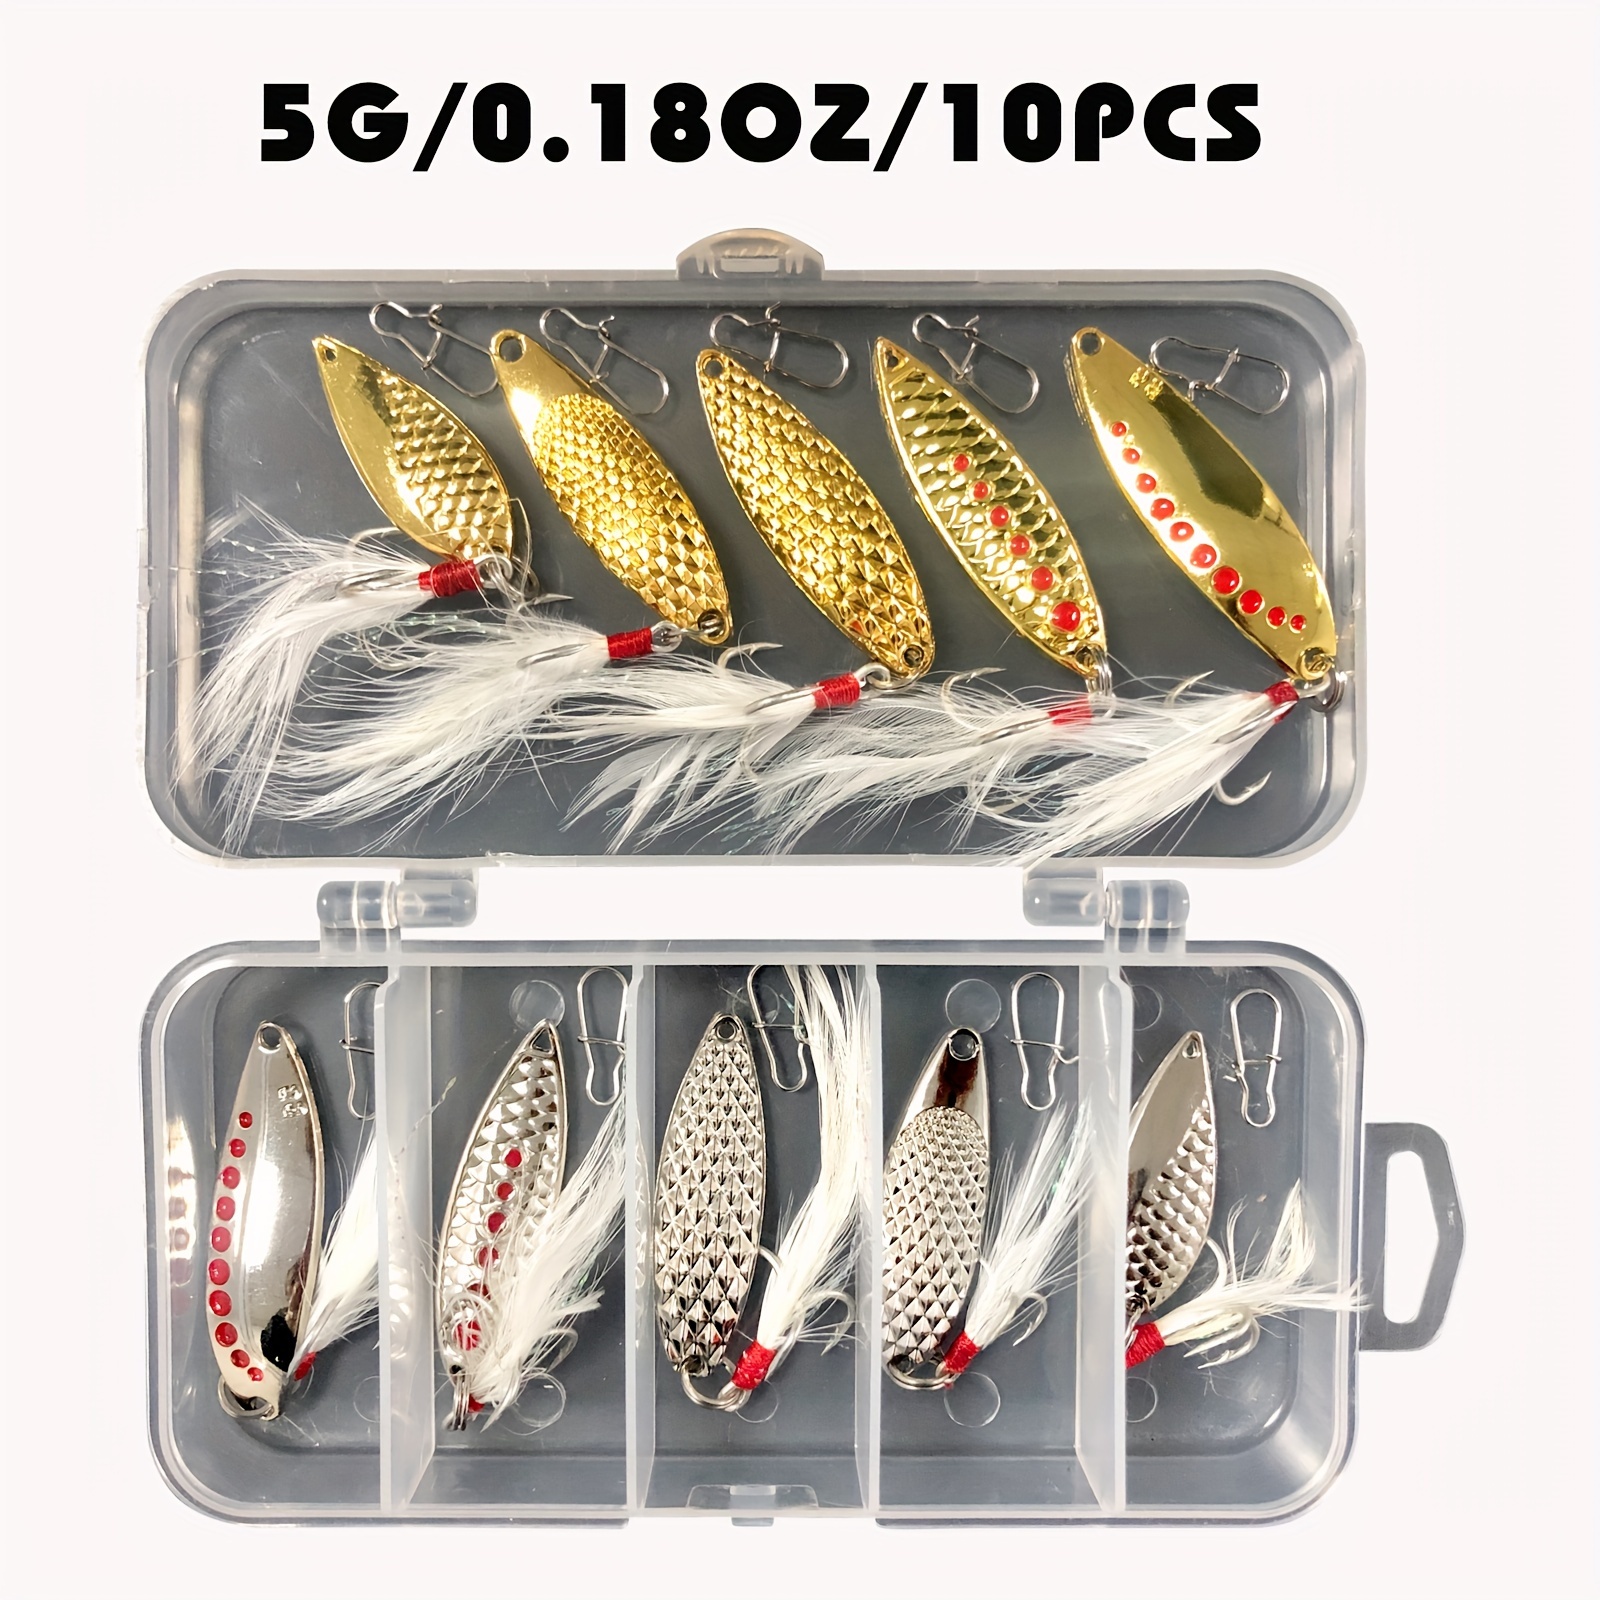 20pcs Hard Metal Spinner Lures Baits for Bass Trout Salmon Fishing